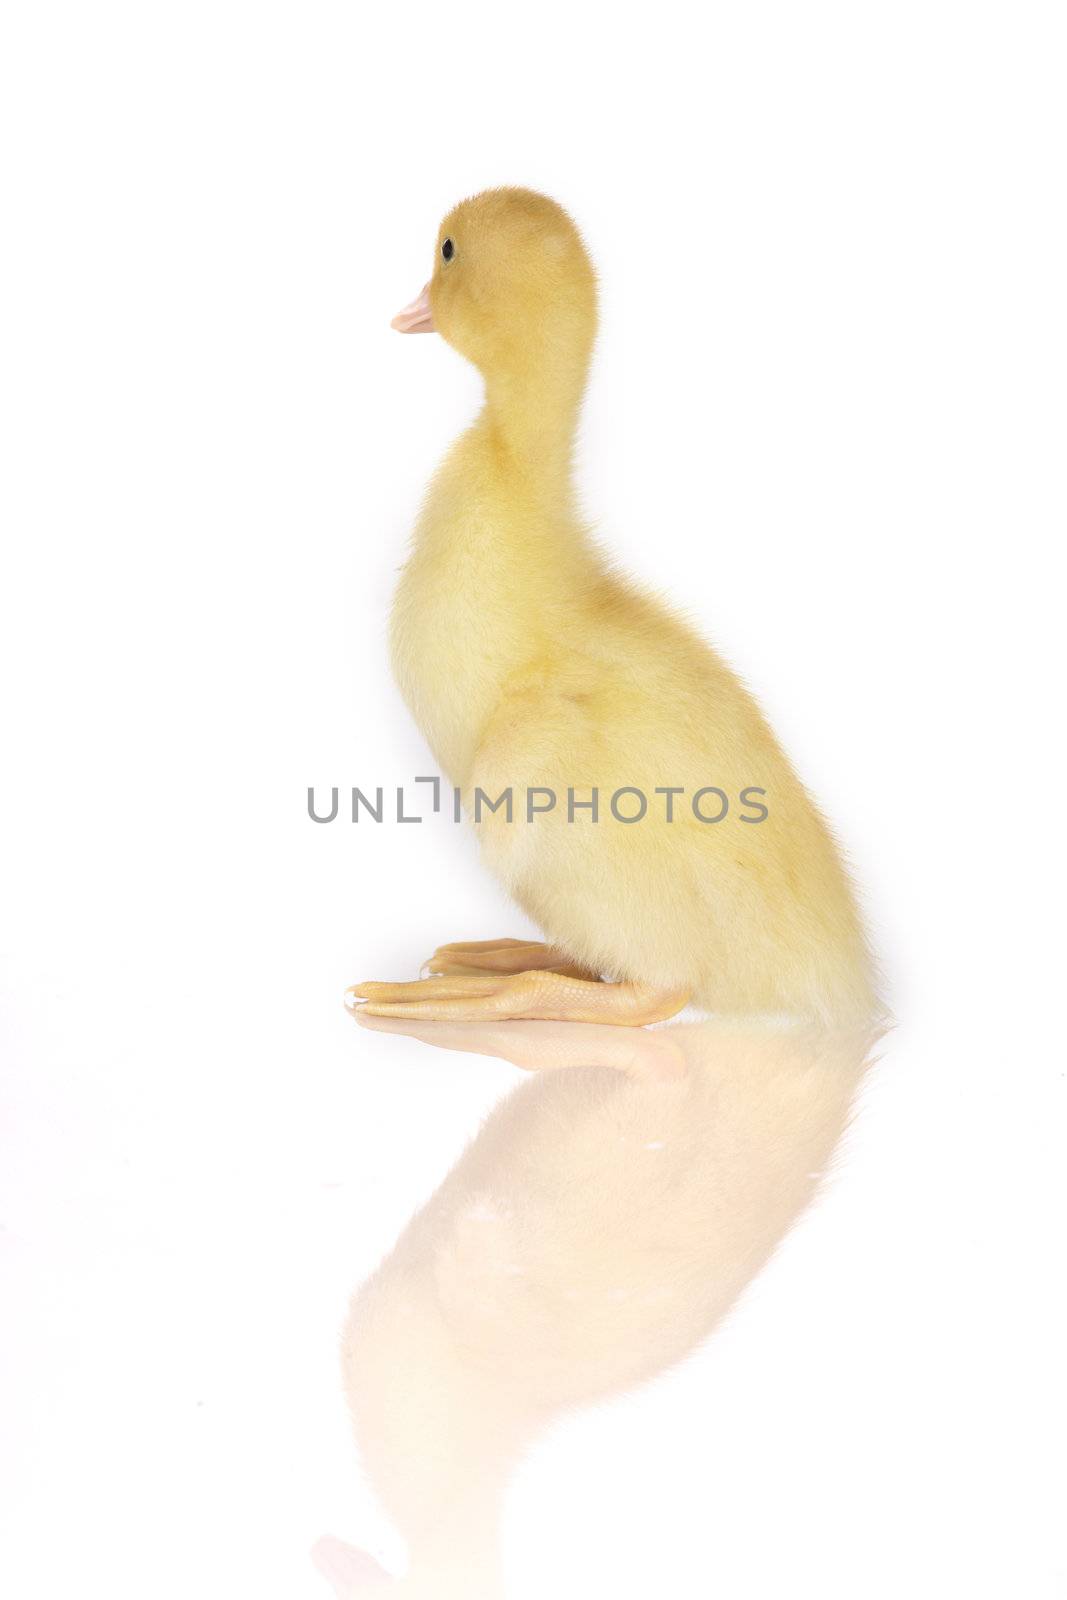 Cute yellow duckling sitting in studio shot, idolated with reflection